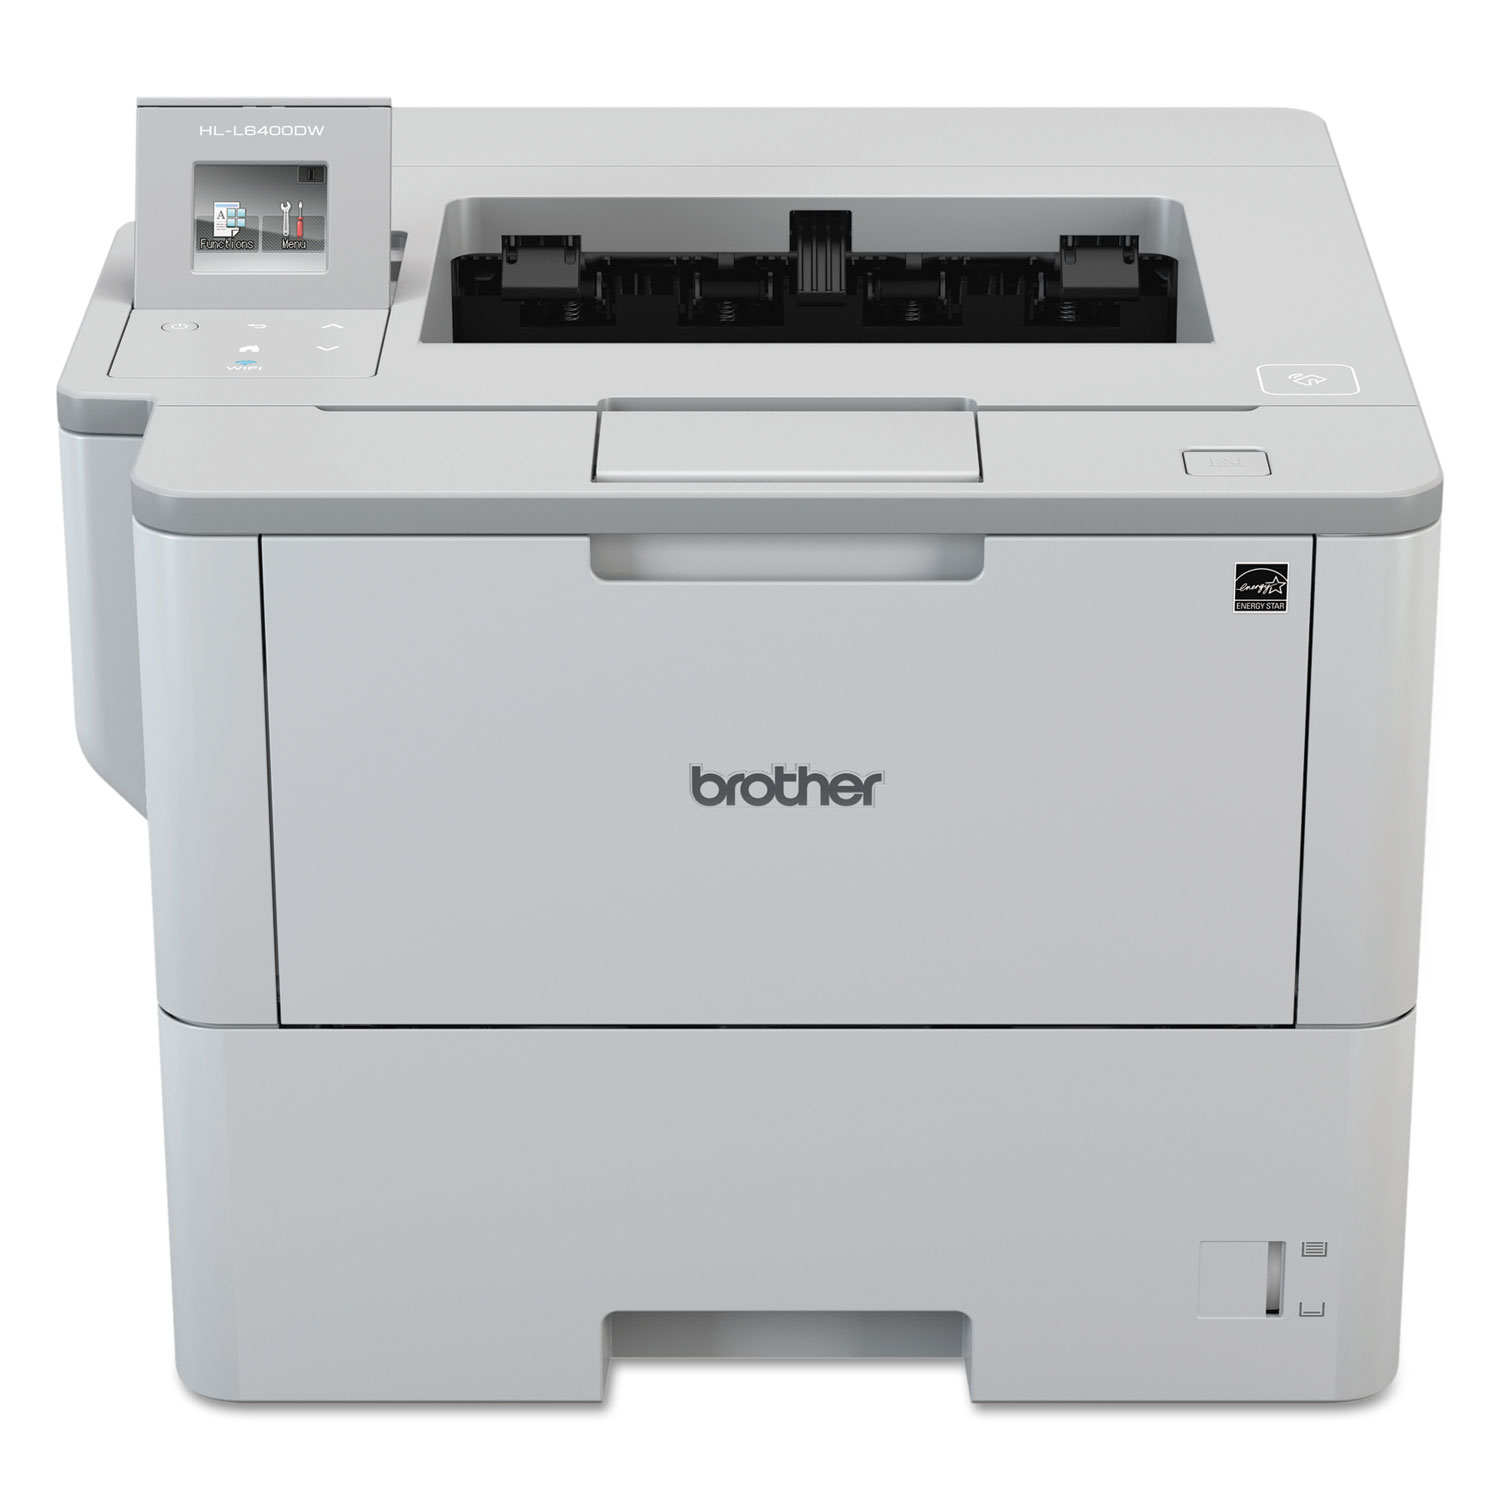  Brother HLL6400DW HLL6400DW Business Laser Printer for Mid-Size Workgroups with Higher Print Volumes (BRTHLL6400DW) 